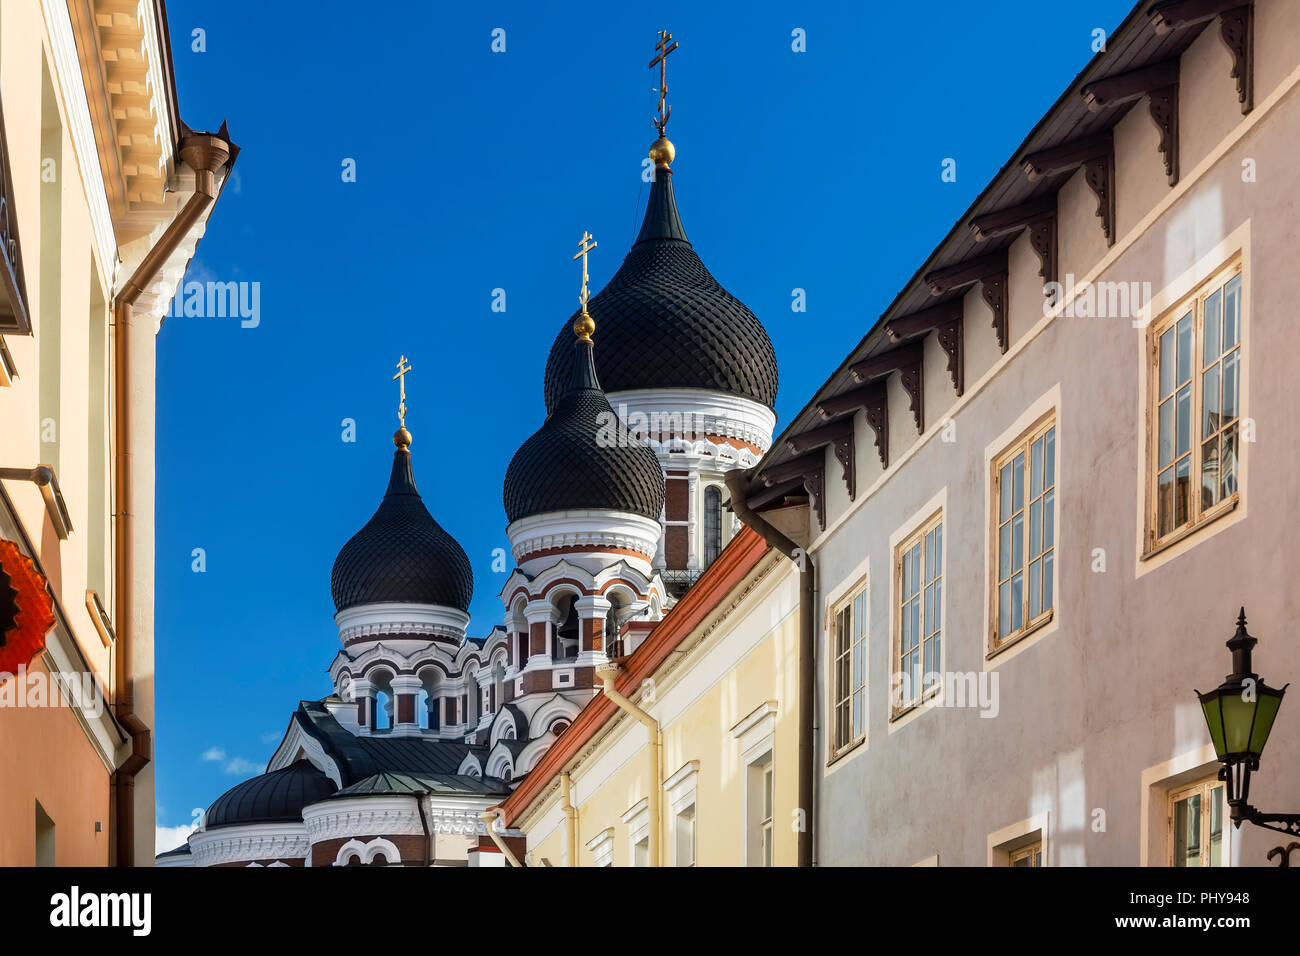 View of the domes of Alexander Nevsky Cathedral, Tallinn, Estonia Stock Photo